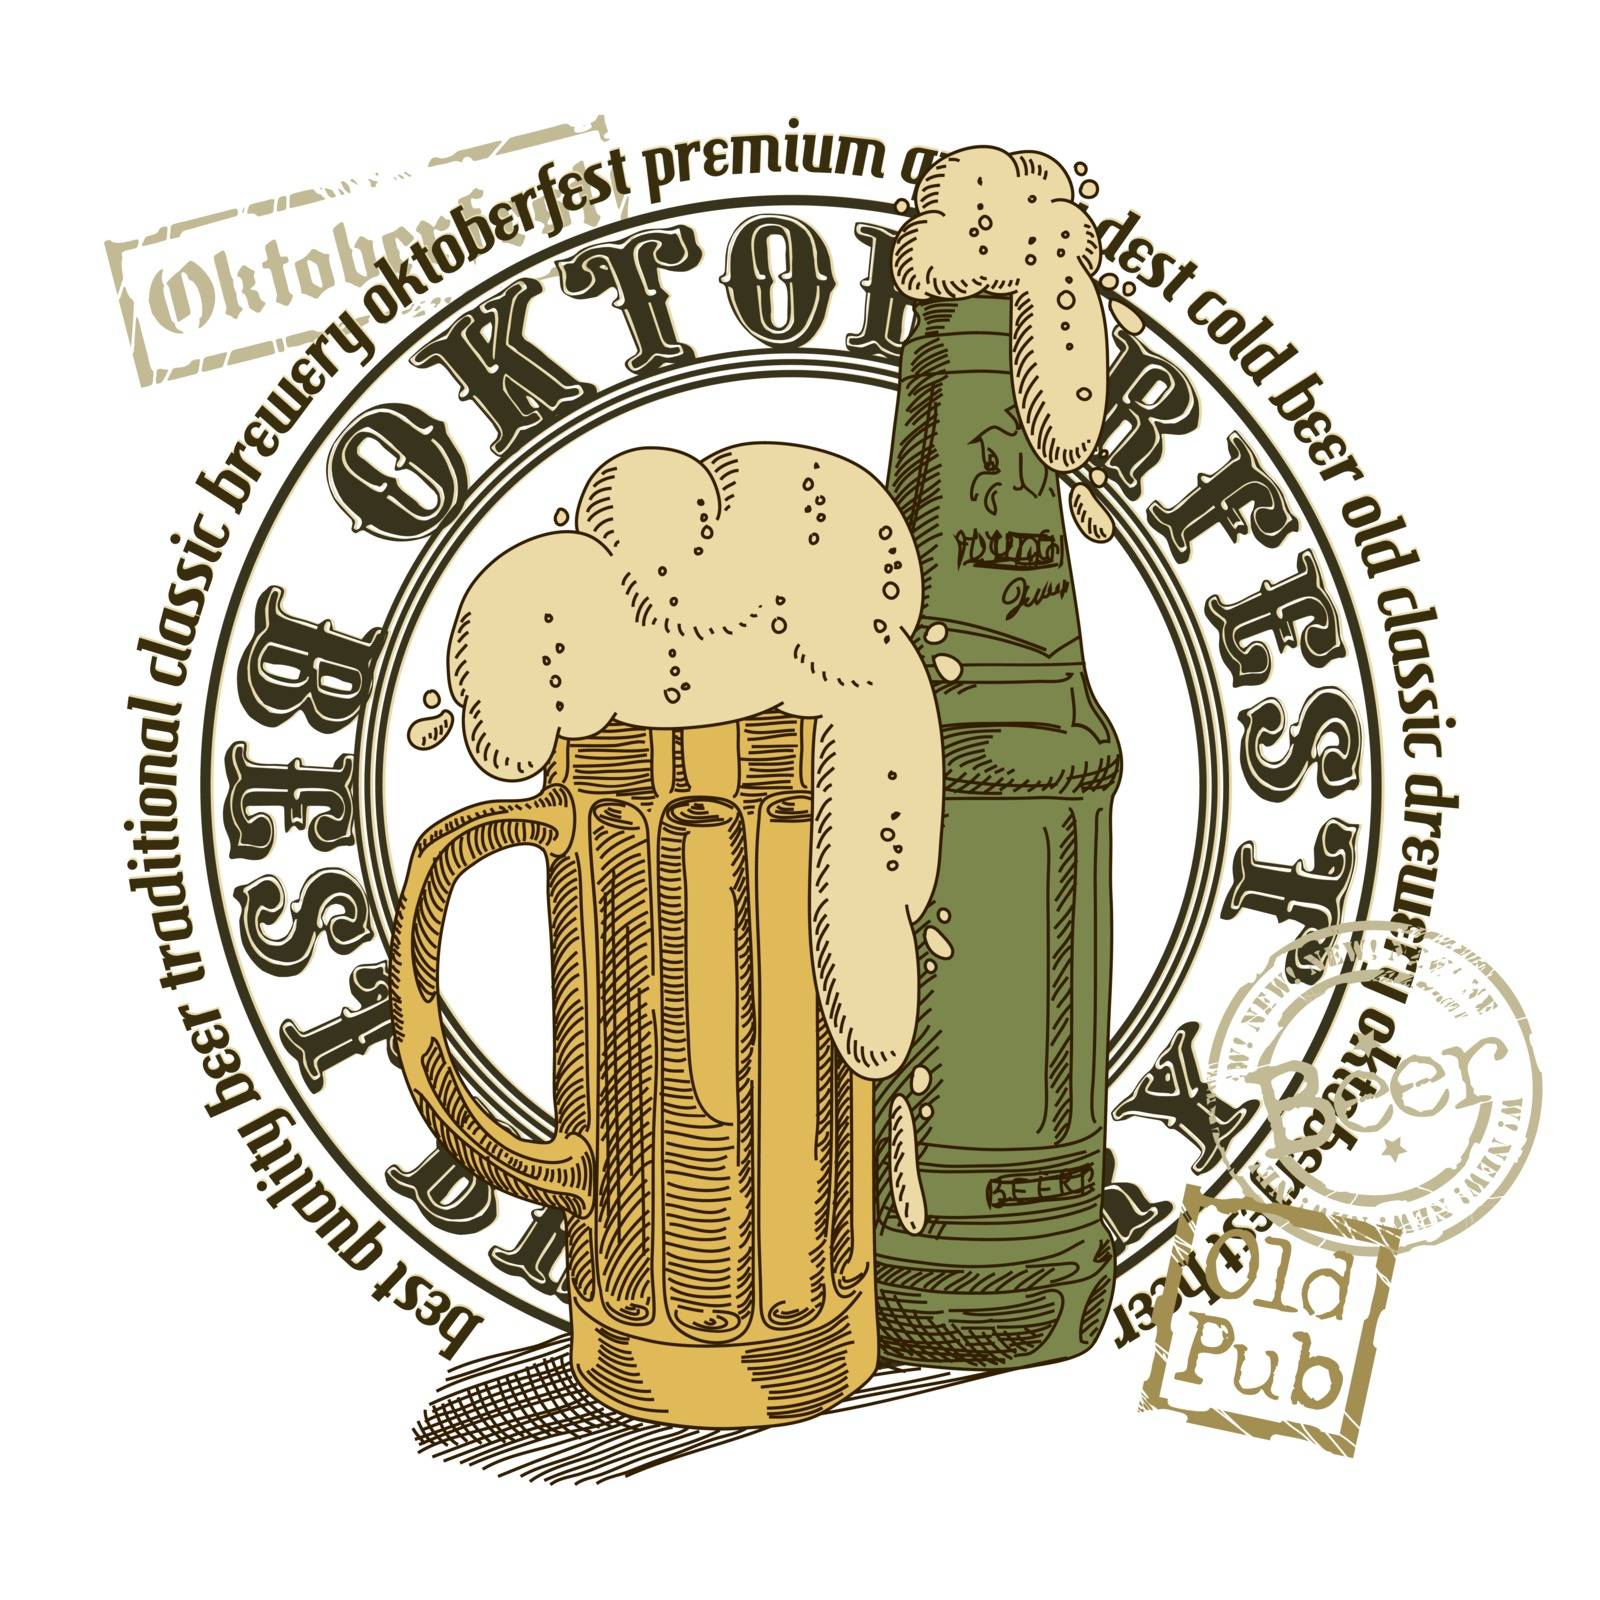 Design flyers and labels to traditional Oktoberfest beer festival